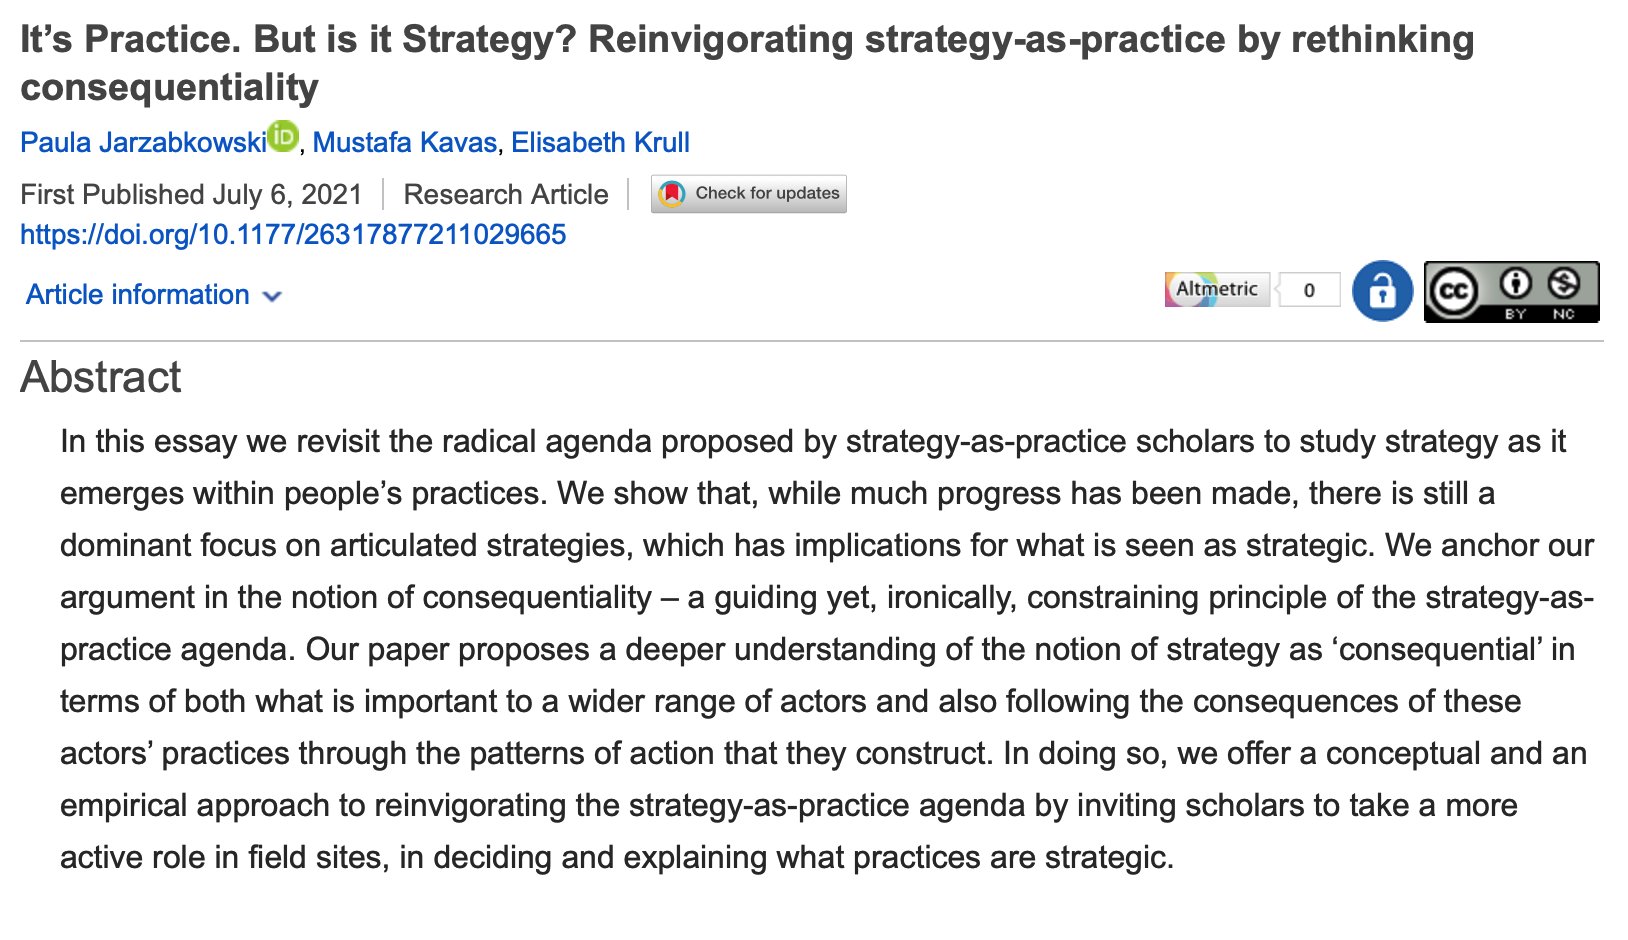 It’s Practice. But is it Strategy? Reinvigorating strategy-as-practice by rethinking consequentiality